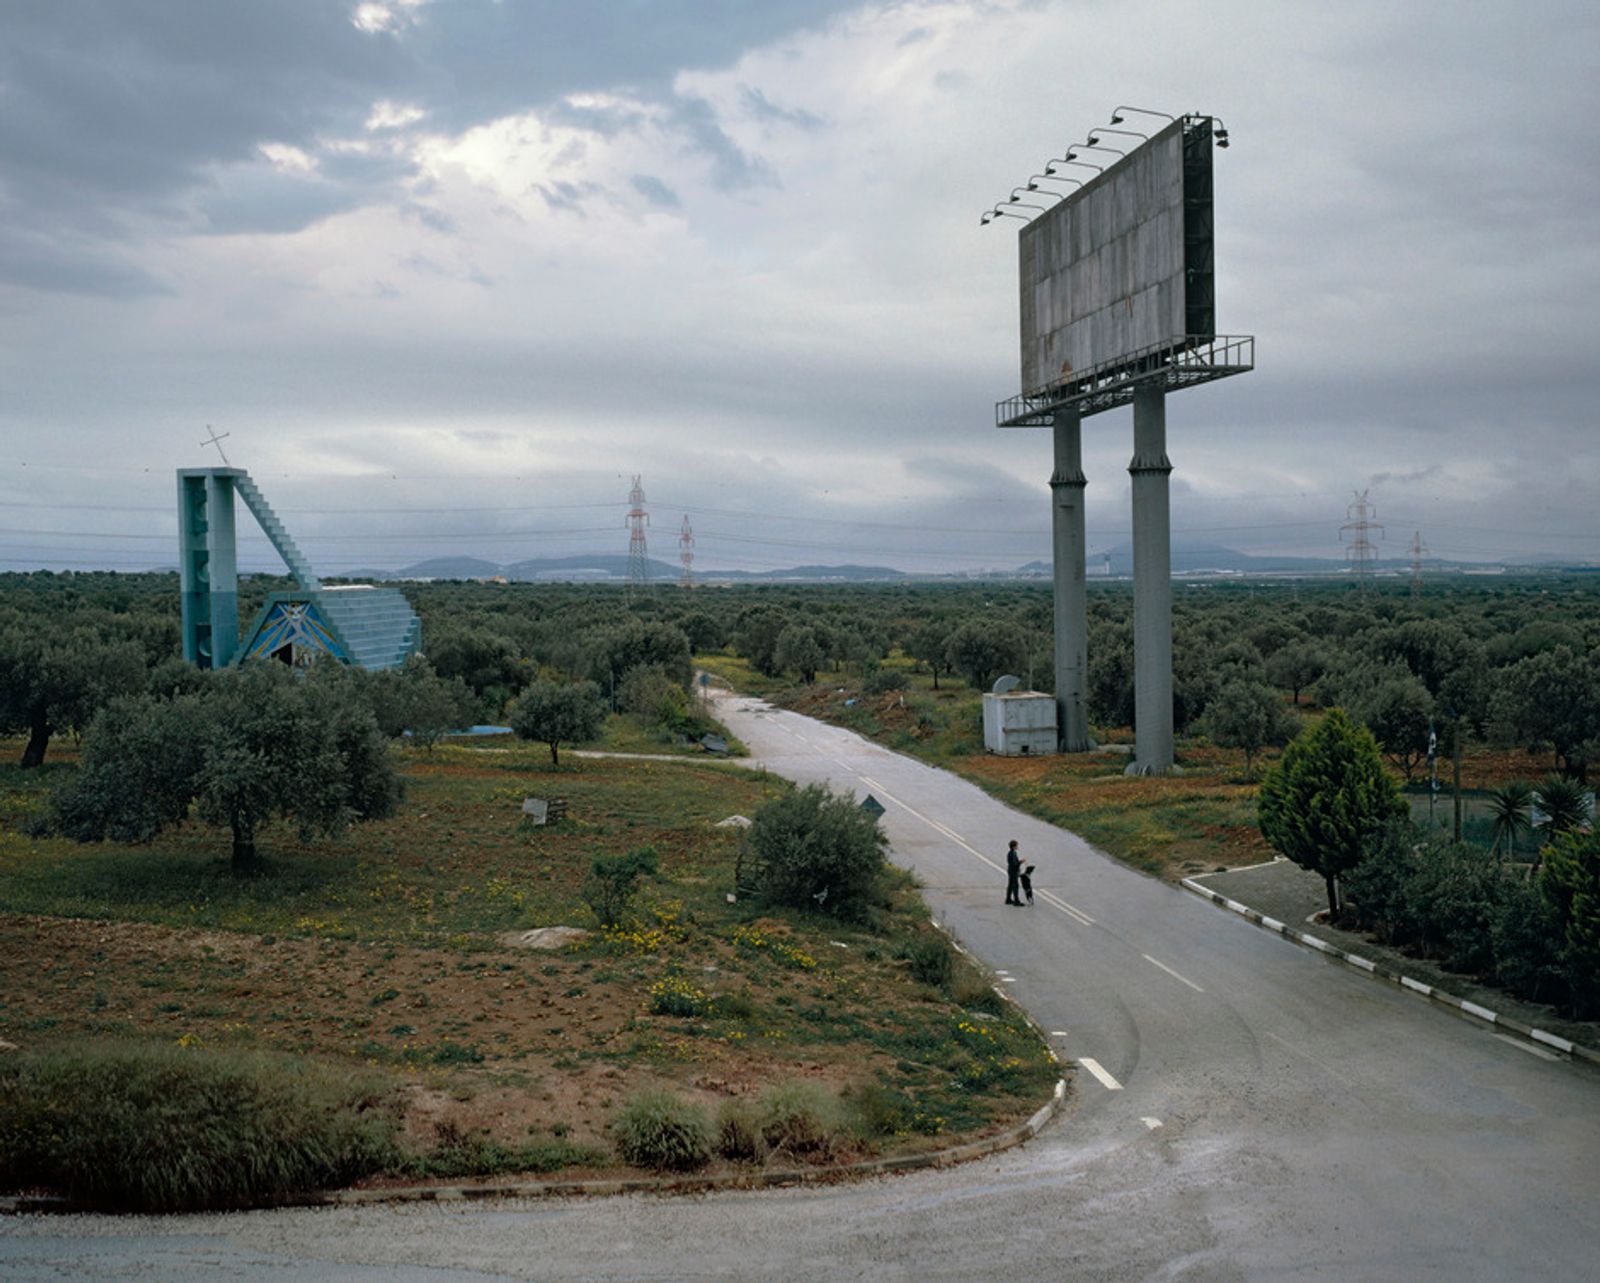 © Kostas Kapsianis - Image from the urban landscape photography project